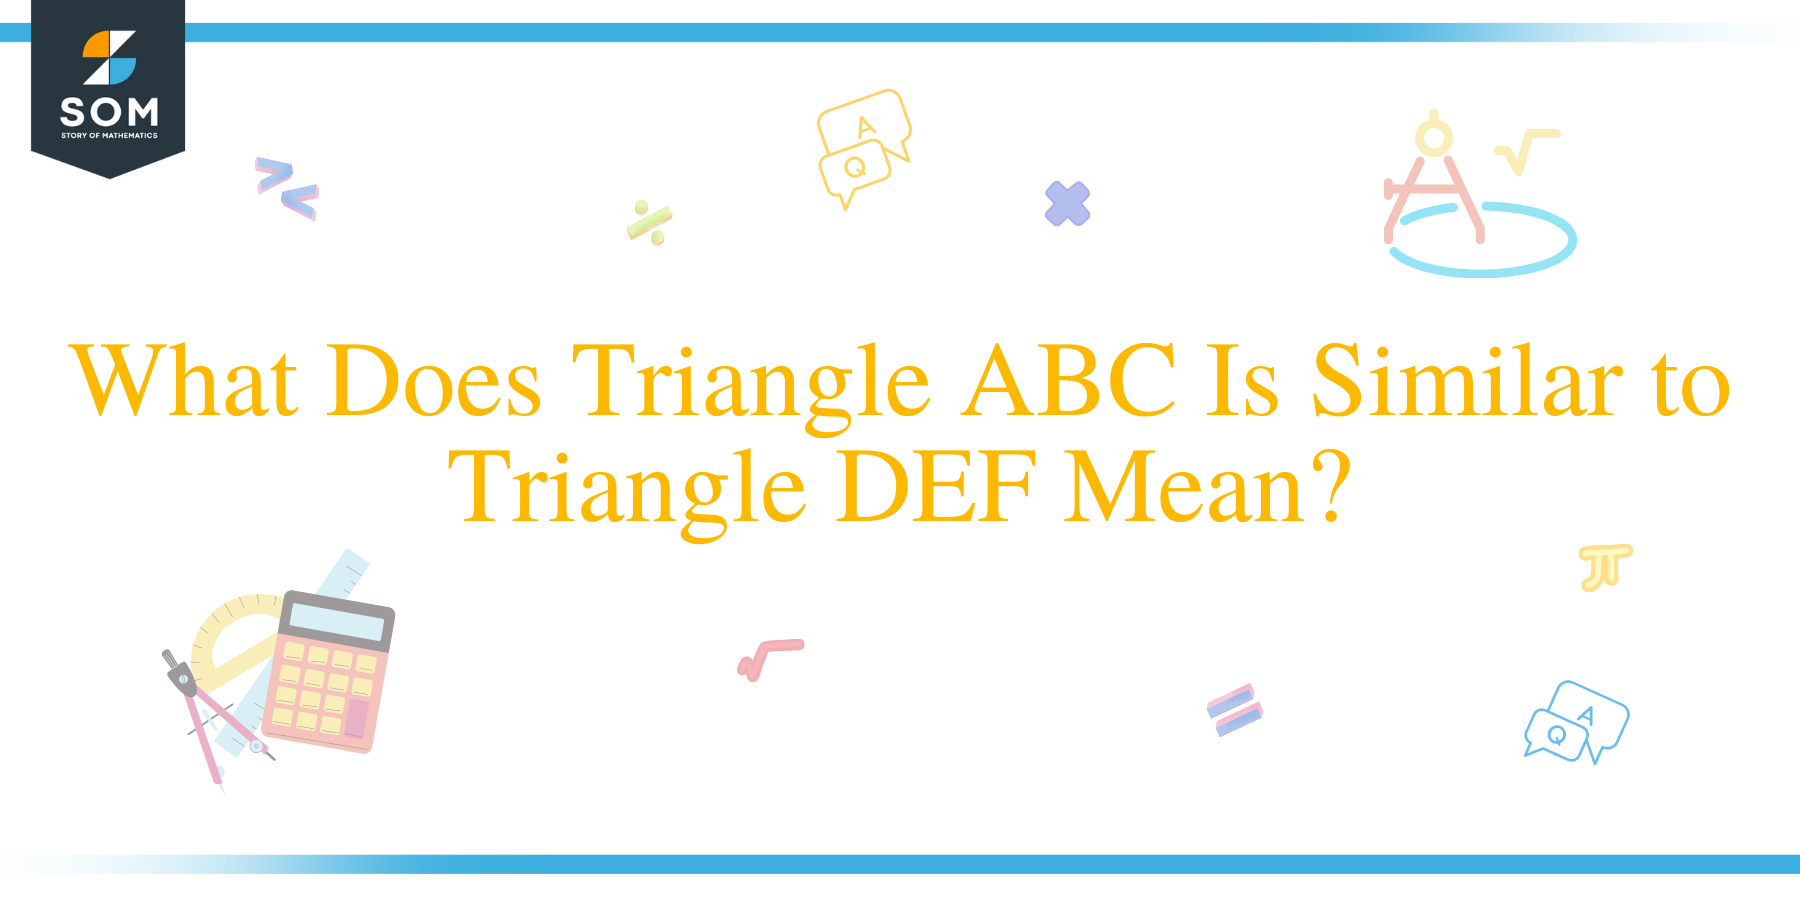 What Does Triangle ABC Is Similar to Triangle DEF Mean?